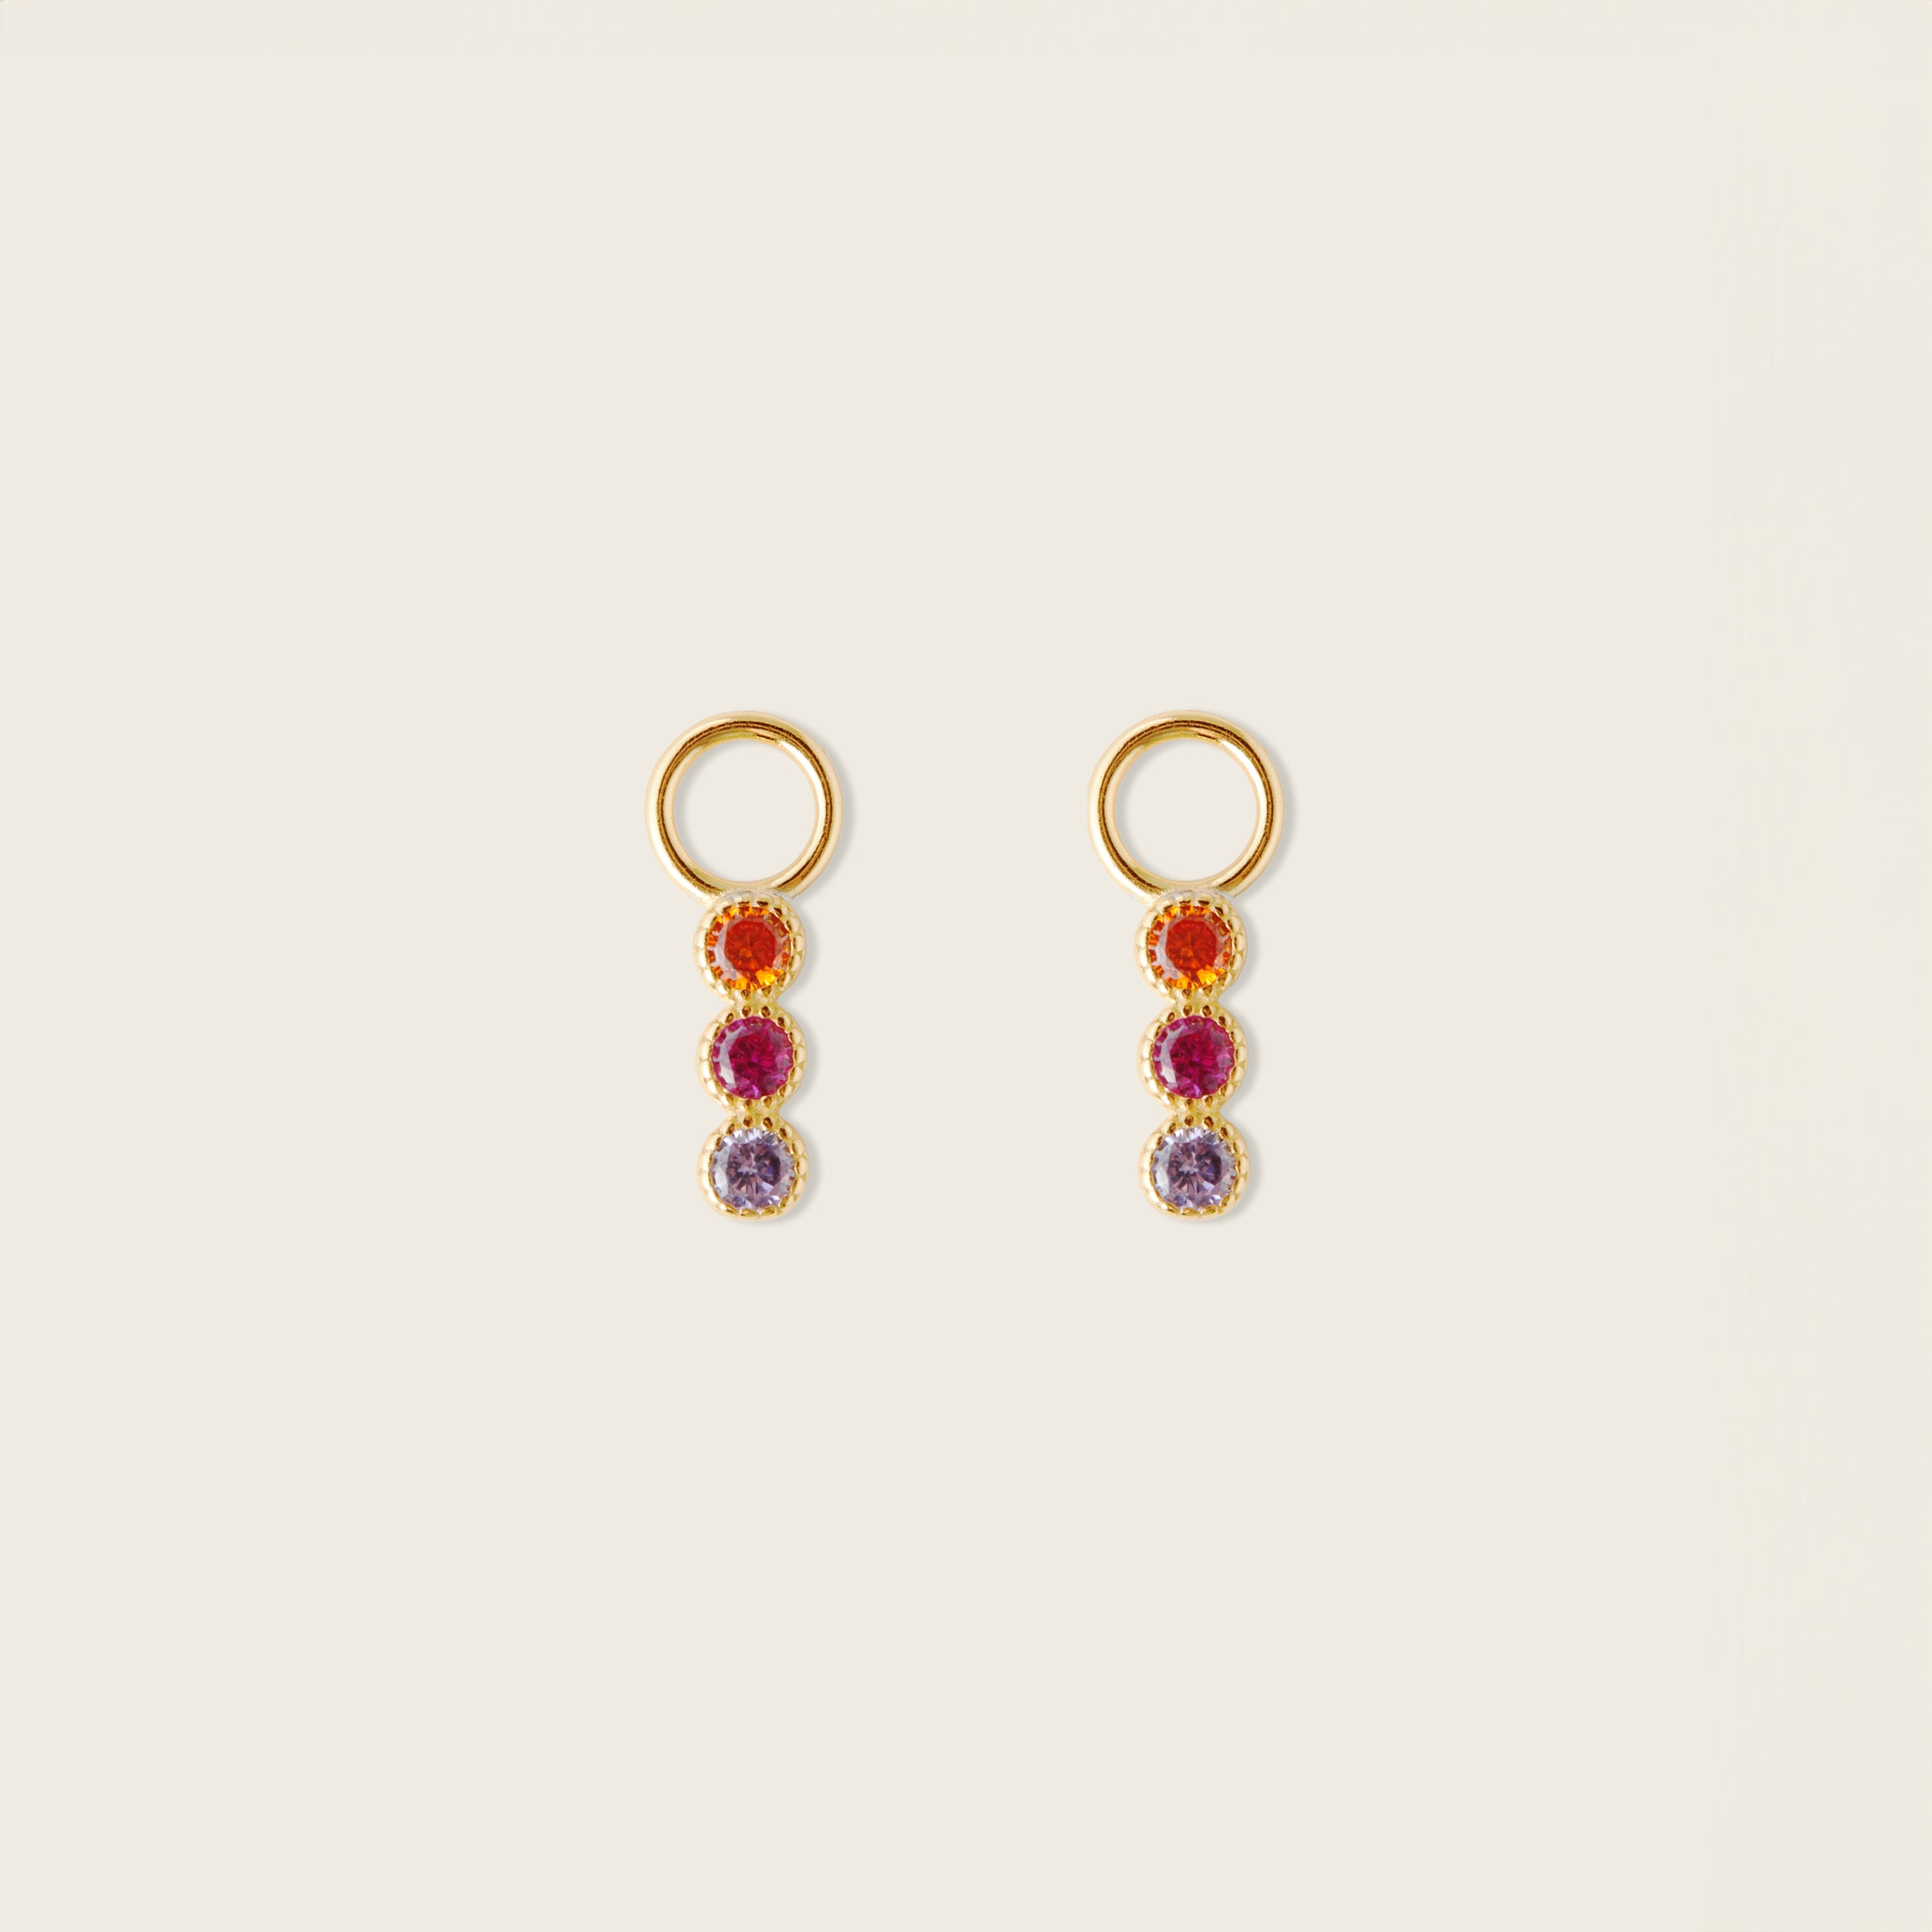 Image of the Sunset Hoop Charms are made with high-quality materials, including 18K gold plating over 925 Sterling Silver. These charms are both non-tarnish and water resistant. The perfect combination of style and durability.